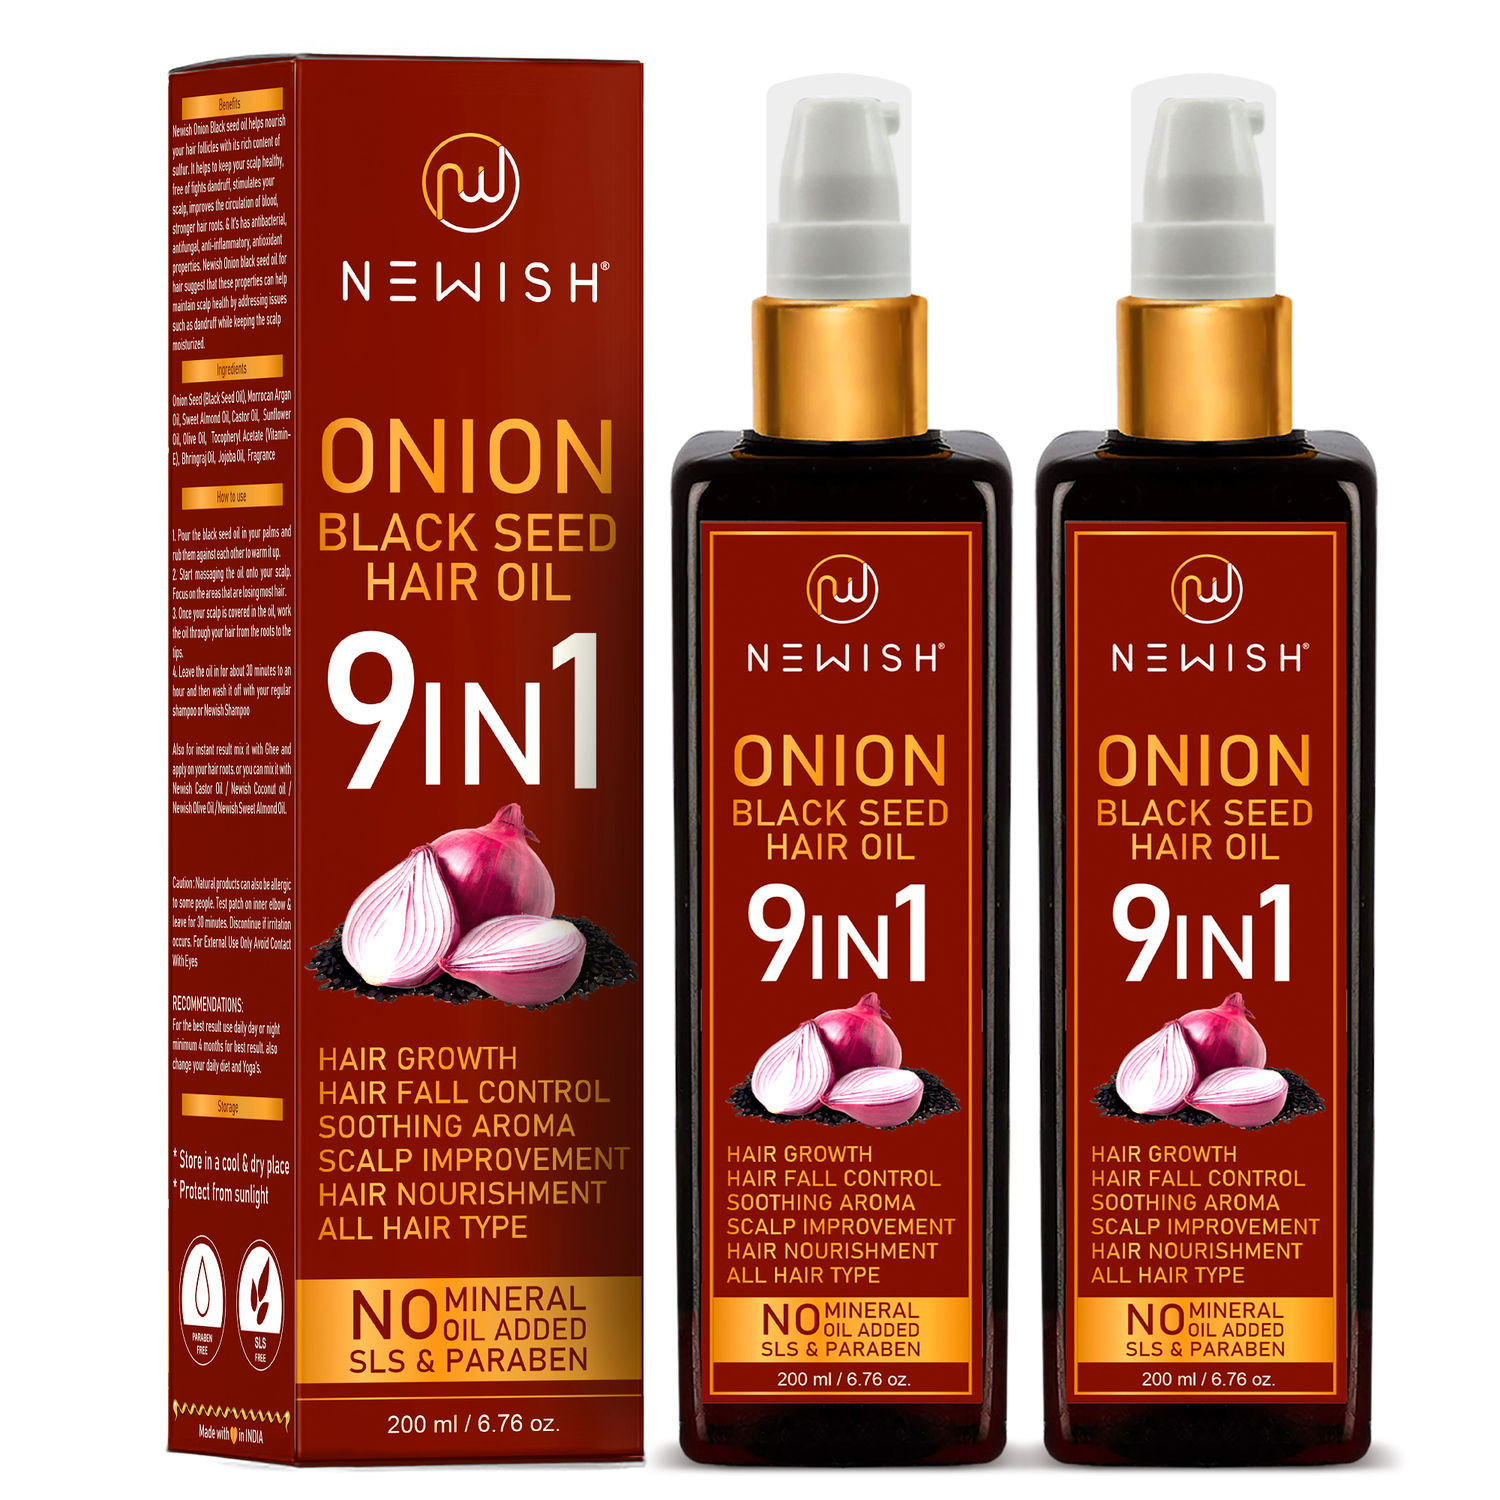 Buy TNWThe Natural Wash Onion Hair Oil for Strong  Healthy Hair With  Black Seed Oil Extracts Suitable for All Hair Types  Onion Oil Prevents  Hair Fall  No Mineral Oil